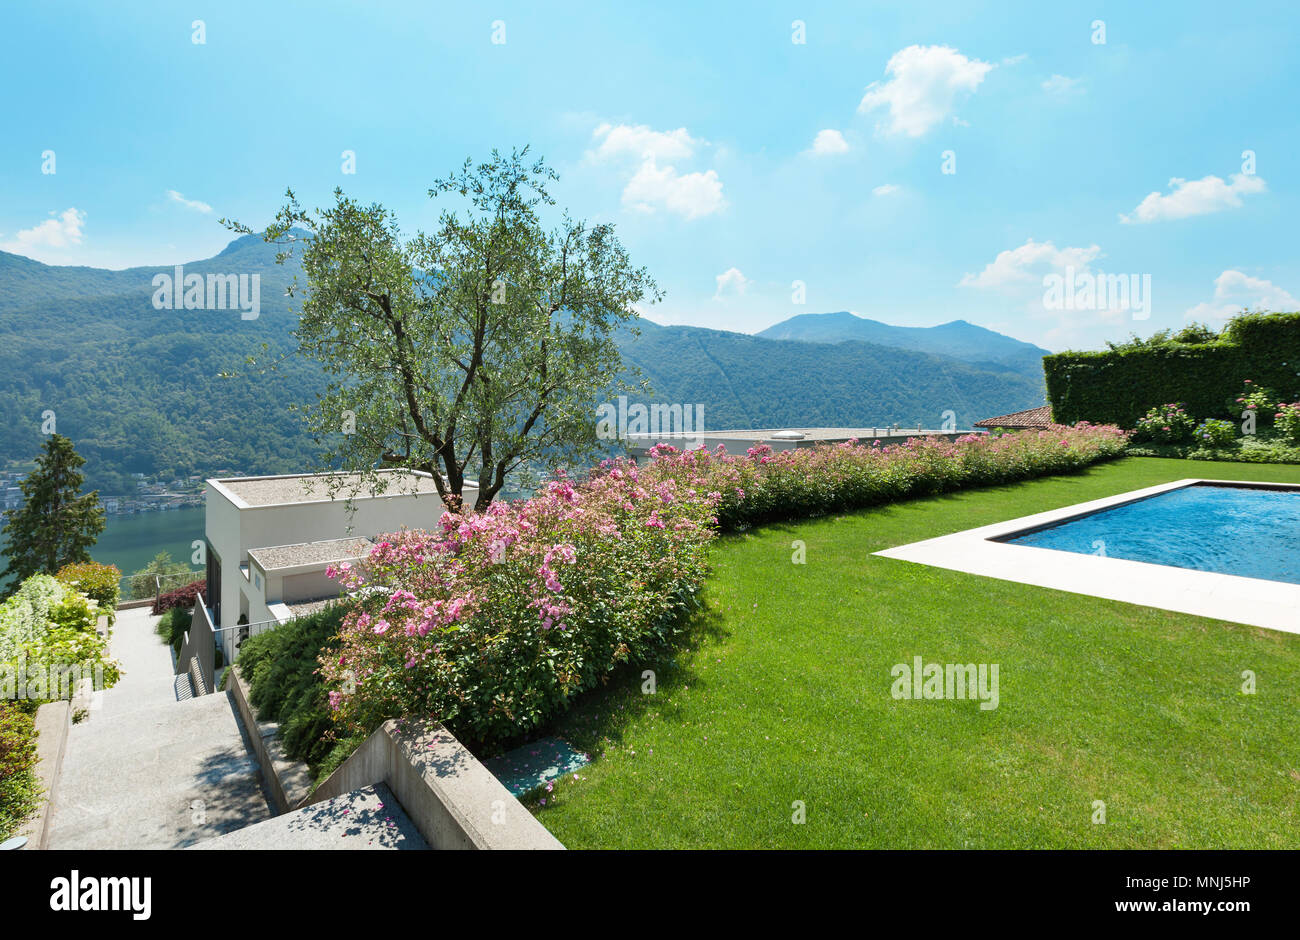 beautiful green garden with pool, outdoors Stock Photo